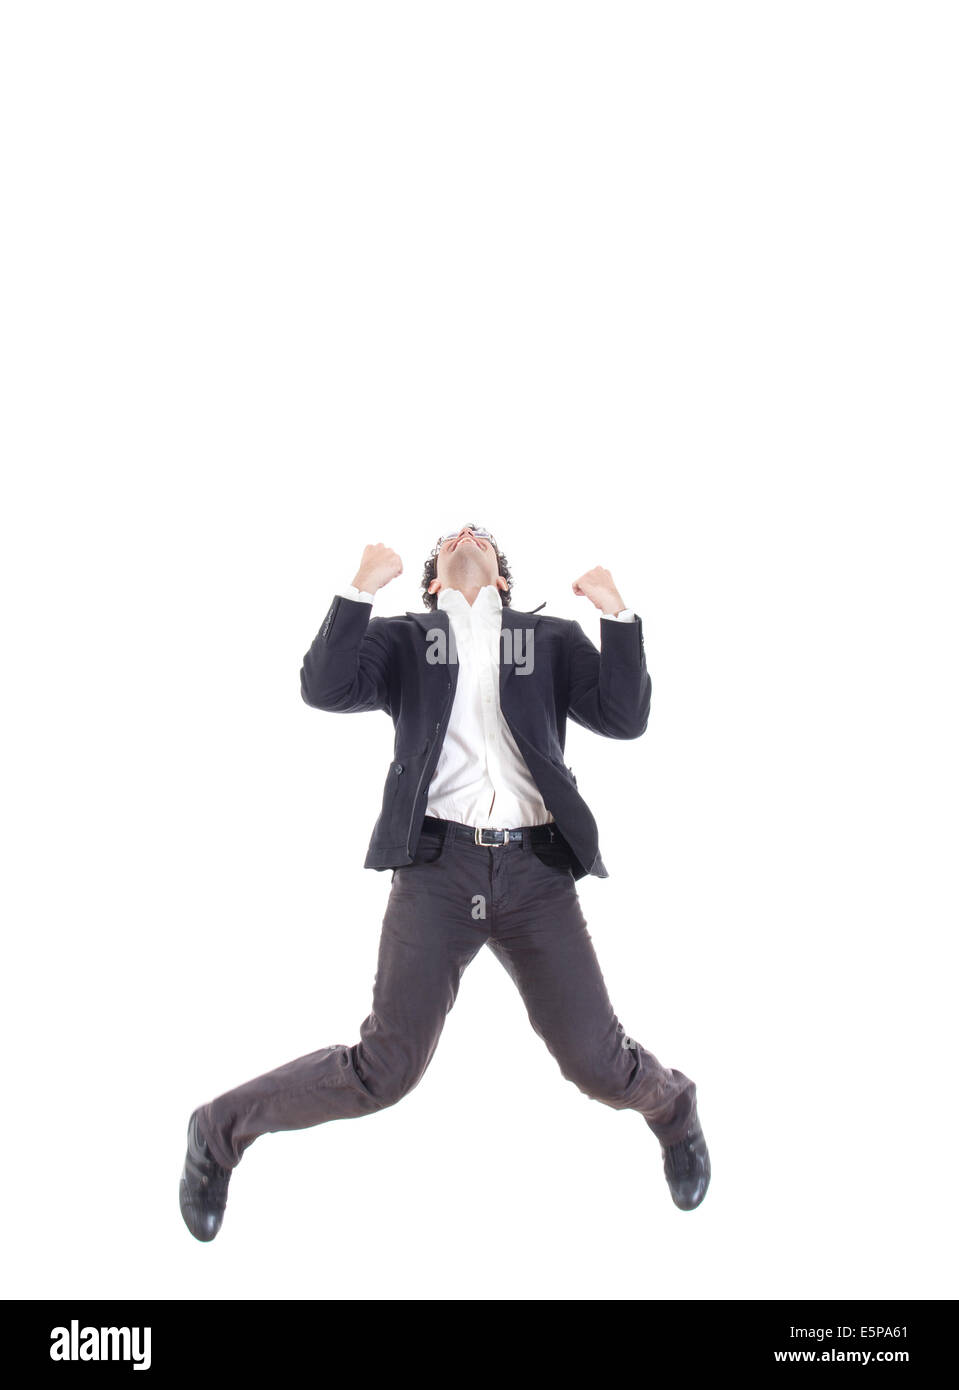 Business man jumping of joy and success with legs spread, isolated over a white background Stock Photo